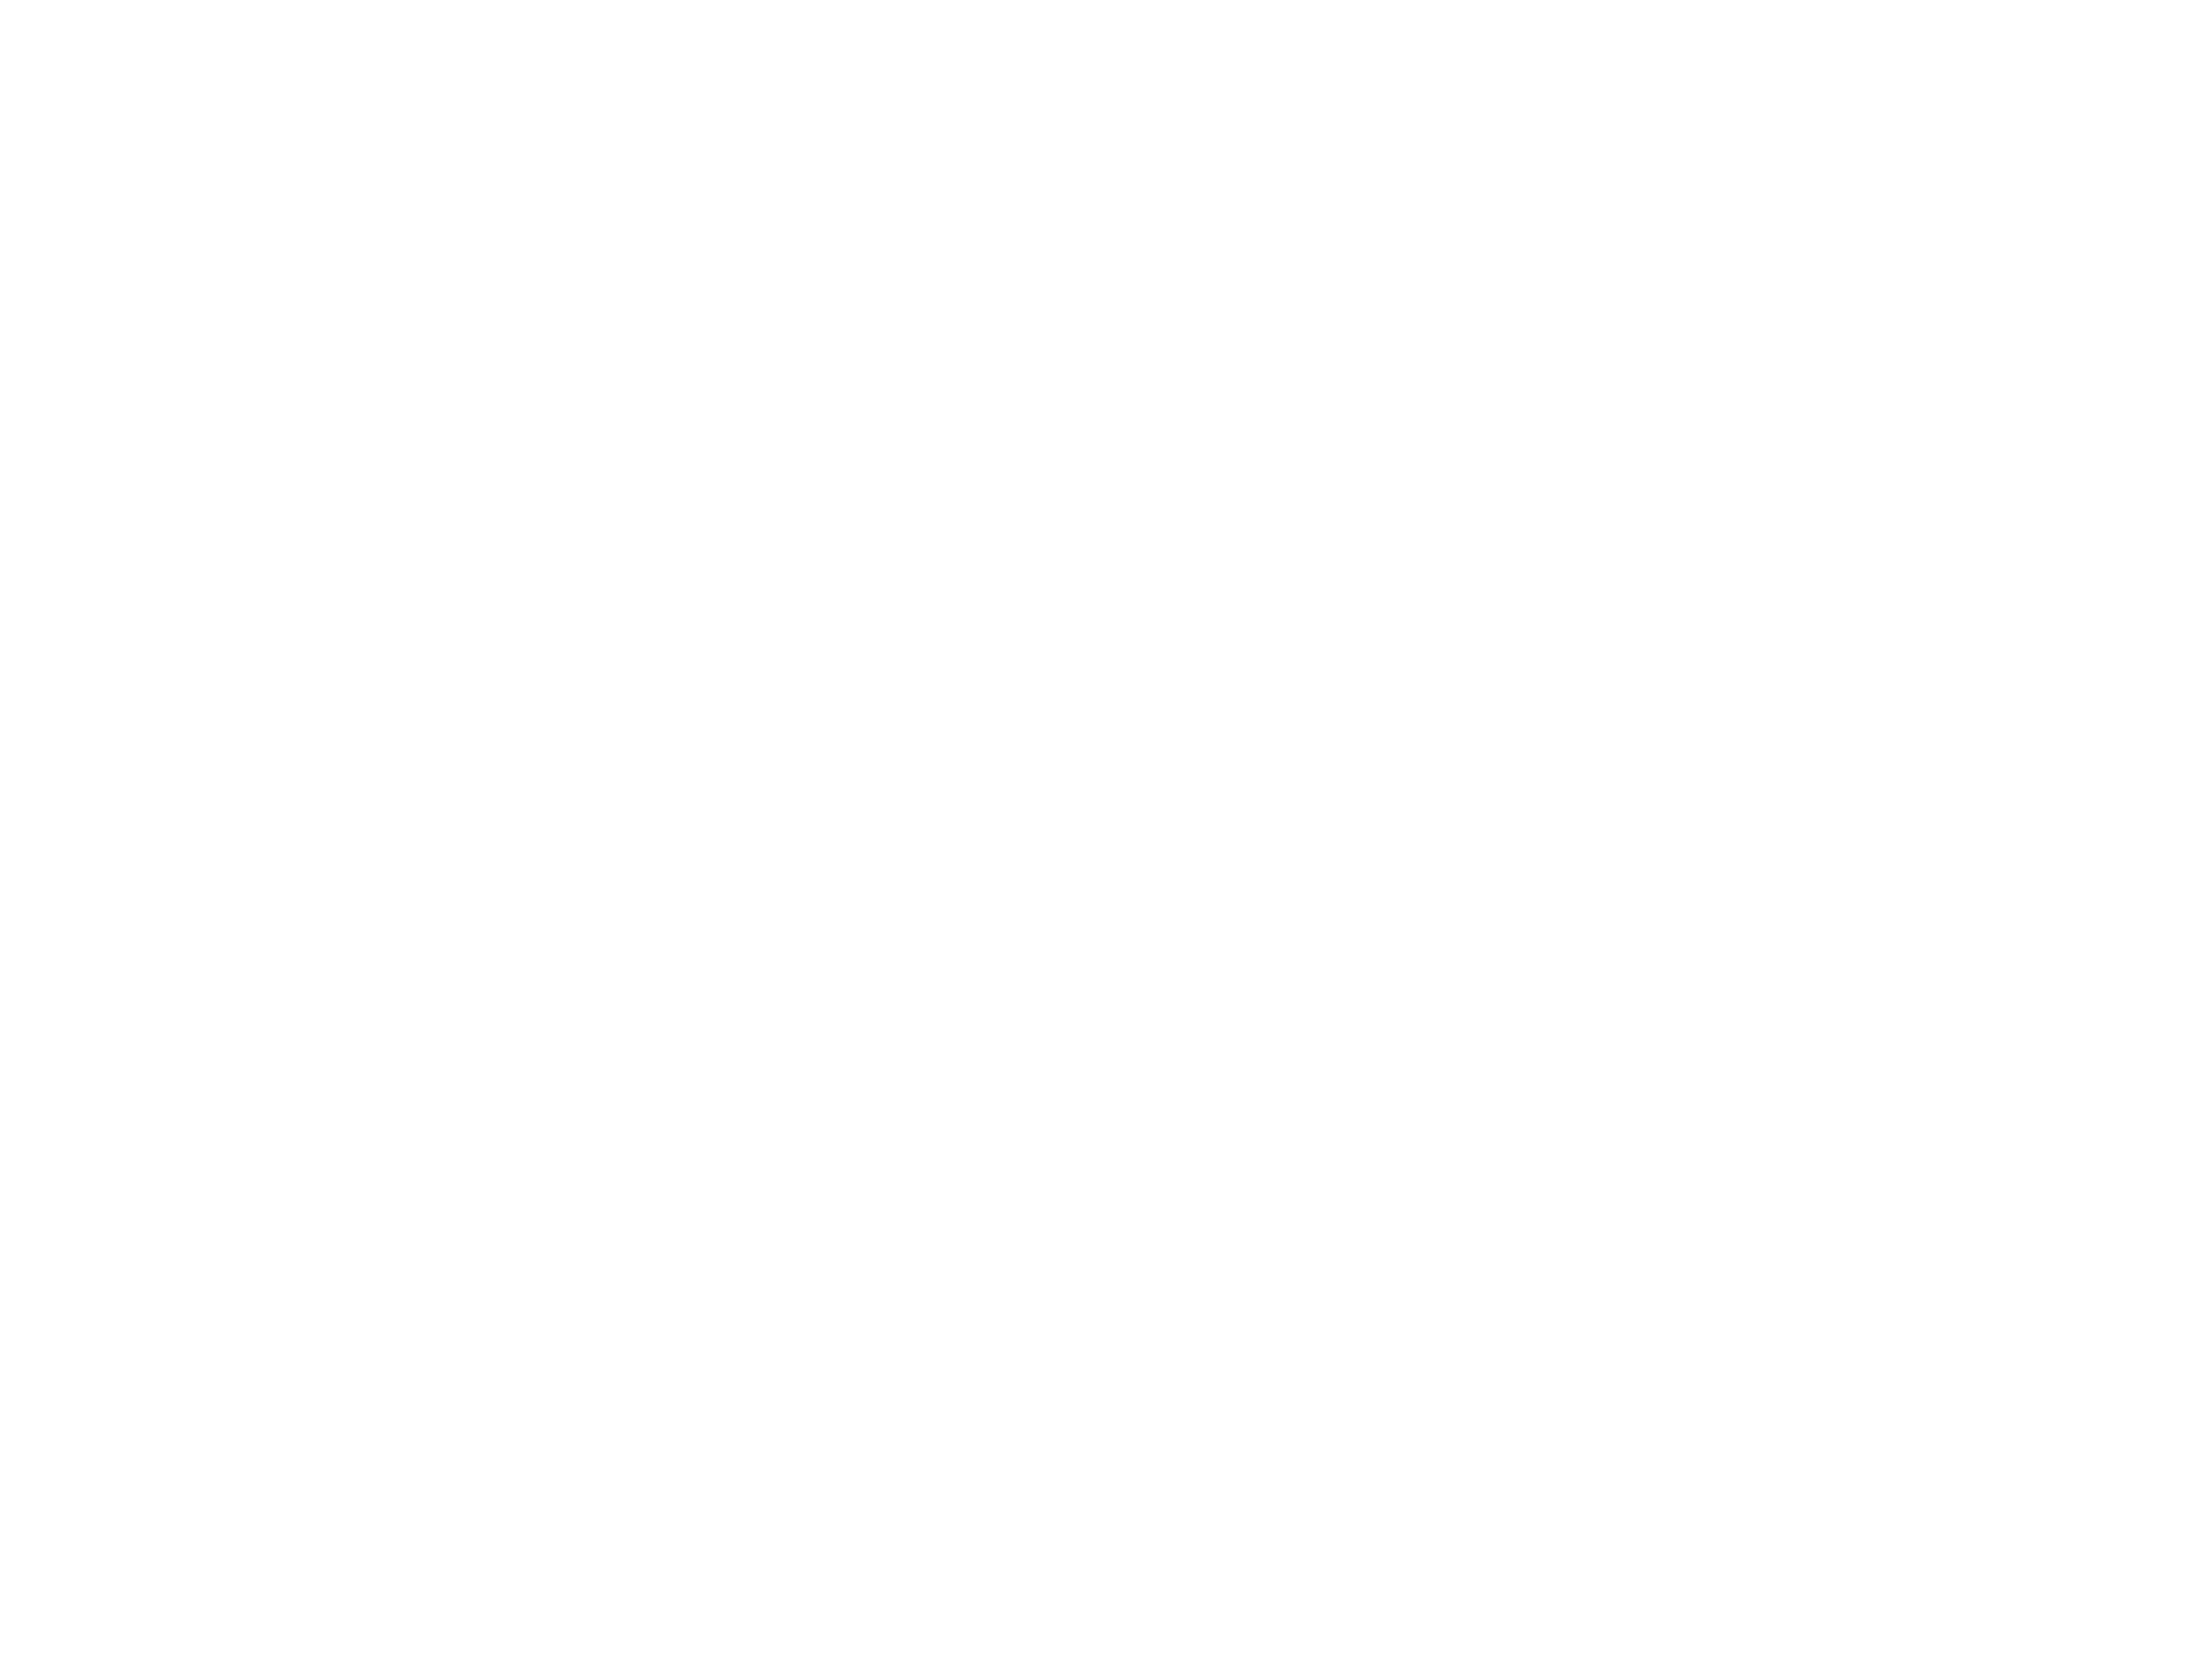 Art Directors Club (ADC) award logo „#1 ADC“, white lettering on black background